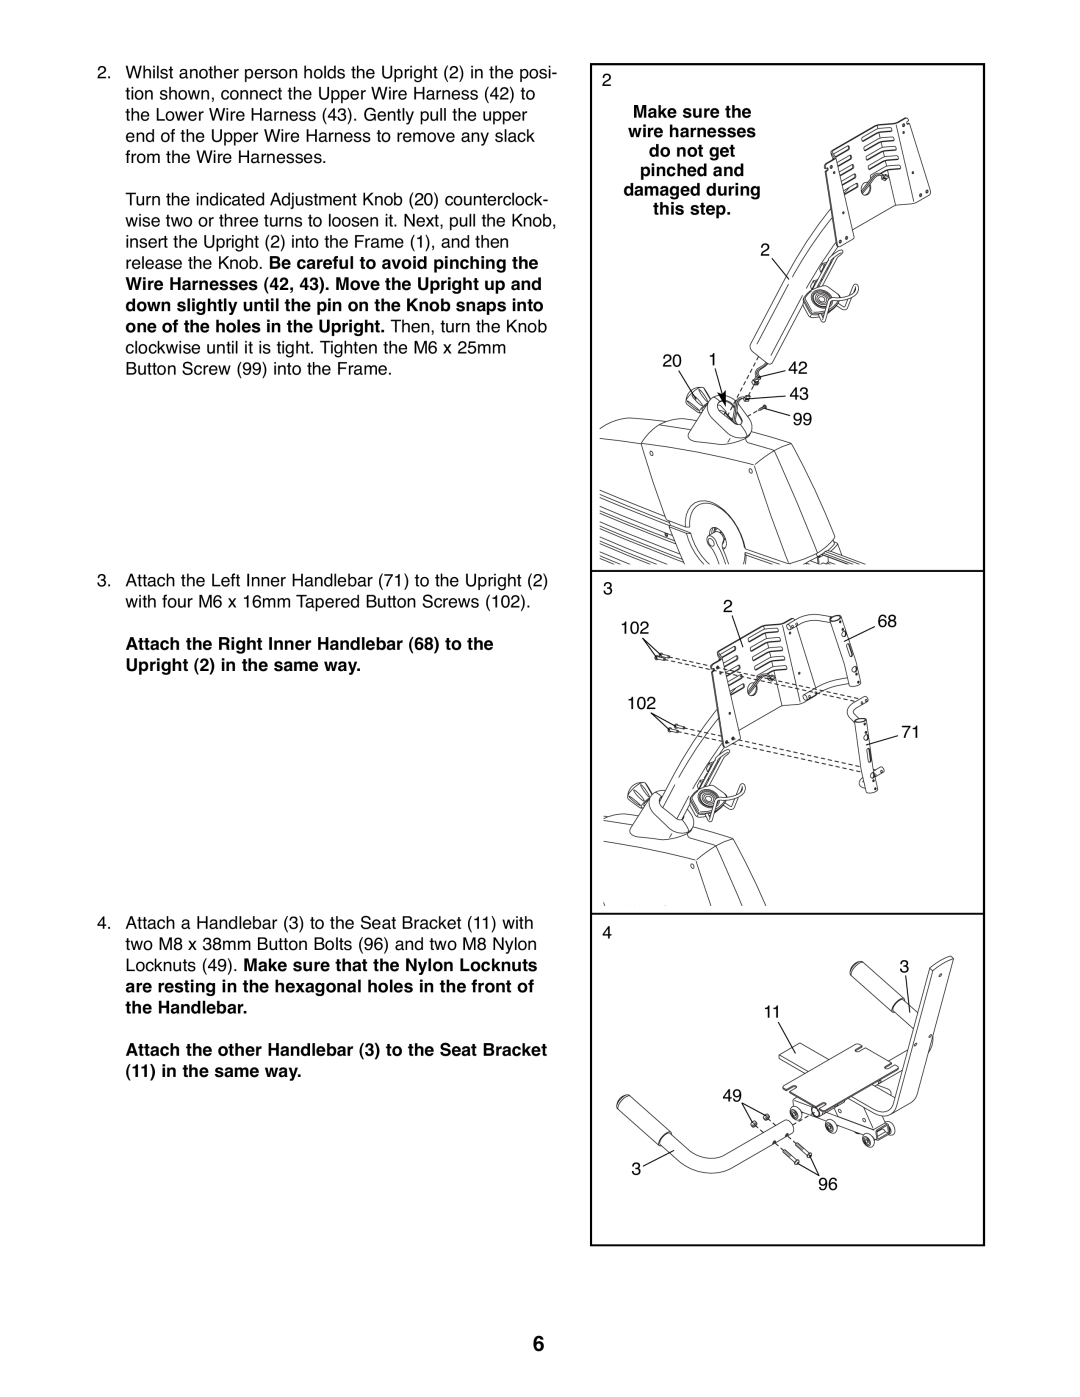 ProForm PFEVEX62832 user manual Attach the Right Inner Handlebar 68 to the Upright 2 in the same way 